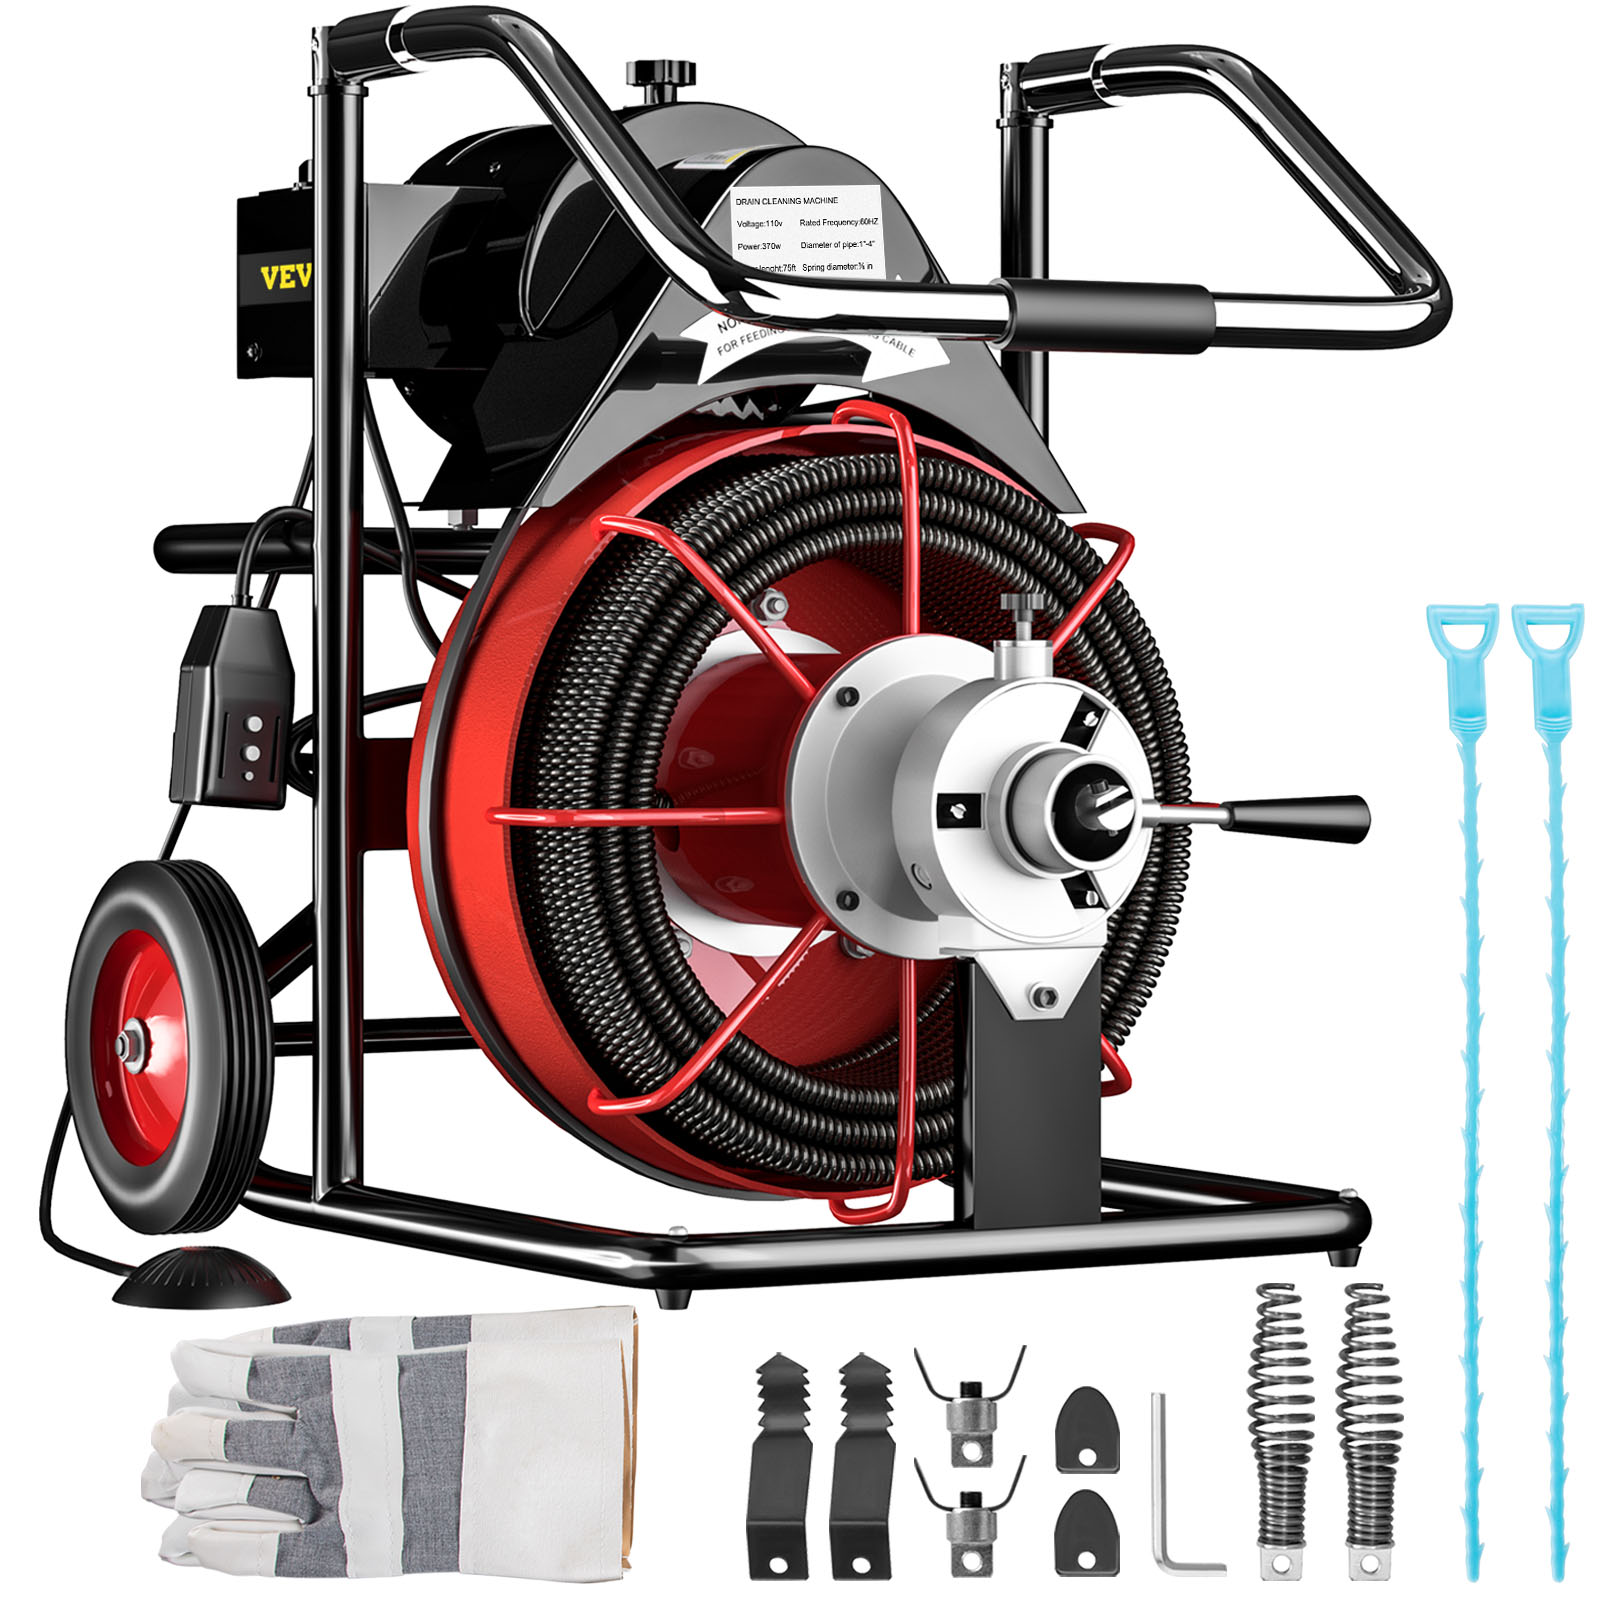 VEVOR 75 Ft x 3/8Inch Drain Cleaner Machine Auto Feed fit 1(25mm) to  4(100mm) Pipes 370W Open Drain Cleaning Machine Portable Electric Drain  Auger with Cutters Glove Sewer Snake